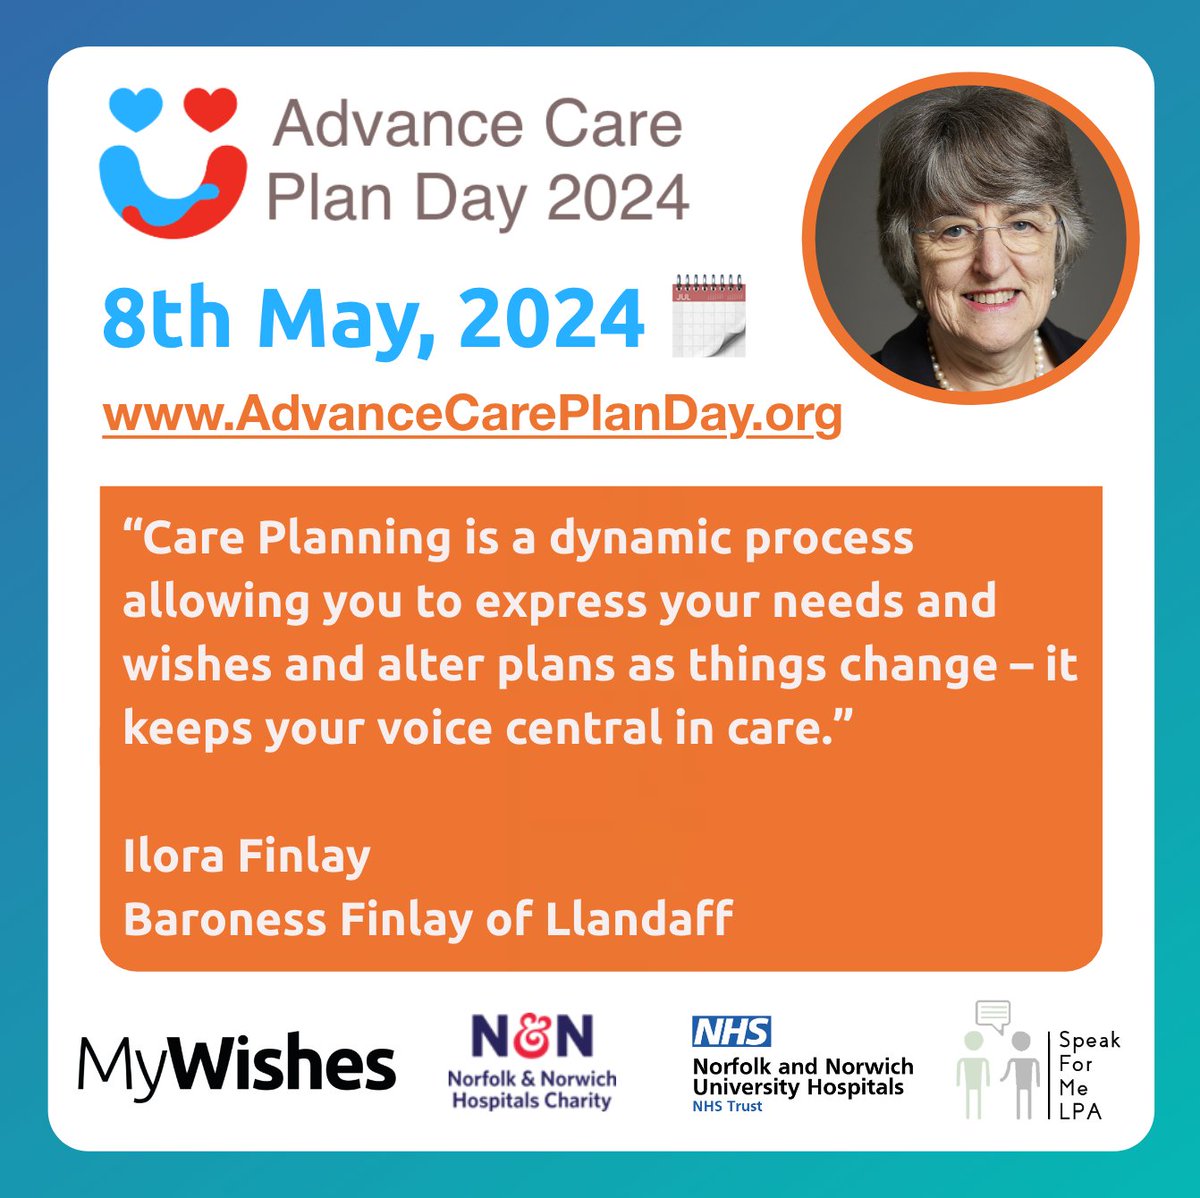 “Care Planning is a dynamic process allowing you to express your needs and wishes and alter plans as things change – it keeps your voice central in care.” Ilora Finlay (@IloraFinlay), Baroness Finlay of Llandaff. #ACPDay2024 #WhatMattersMost